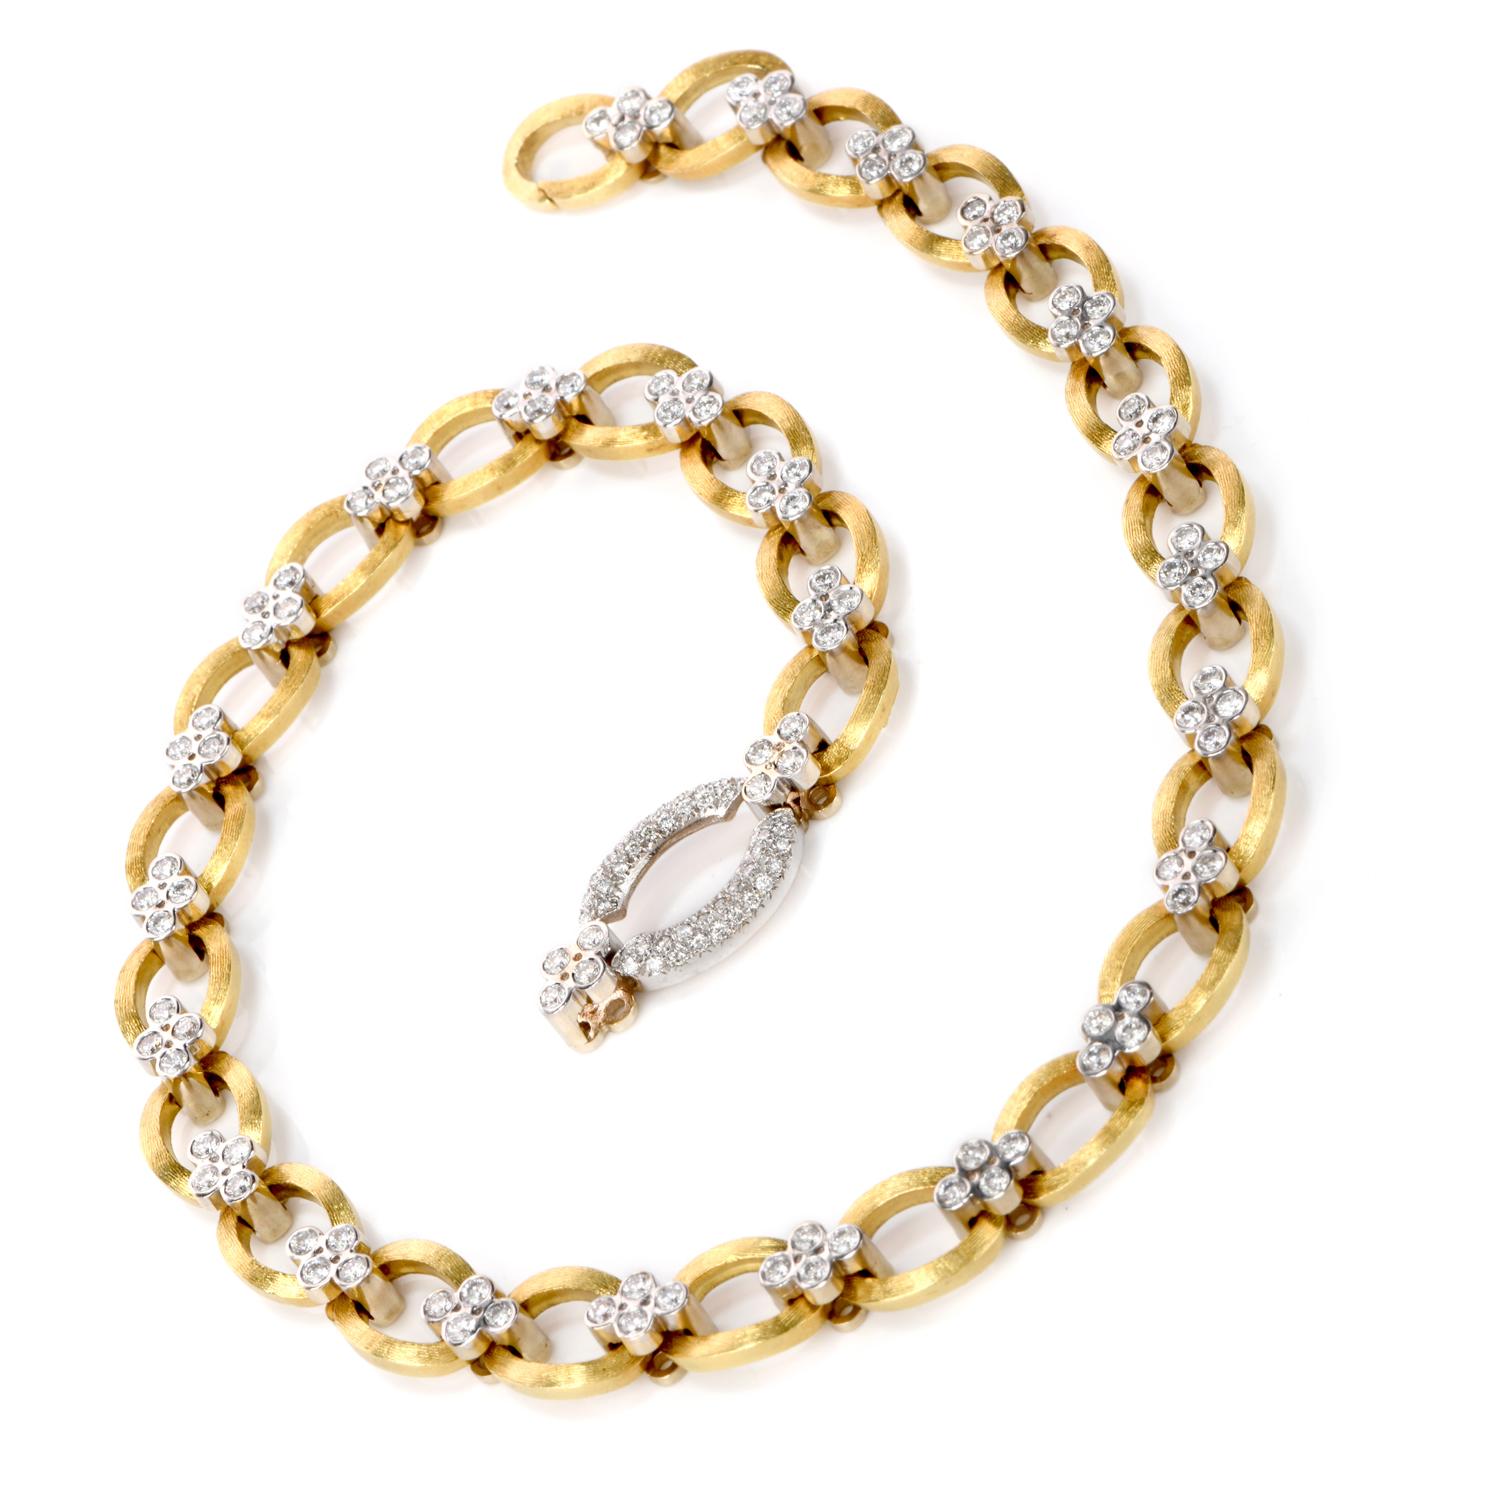 Feel regal in this stunning Estate Diamond 18K Yellow Gold Chain Link Cluster Collar Necklace!  This 18 karat yellow gold necklace has a textured satin finish and weighs an impressive 93.1 Grams.  There are 4 bezel set diamond clusters throughout